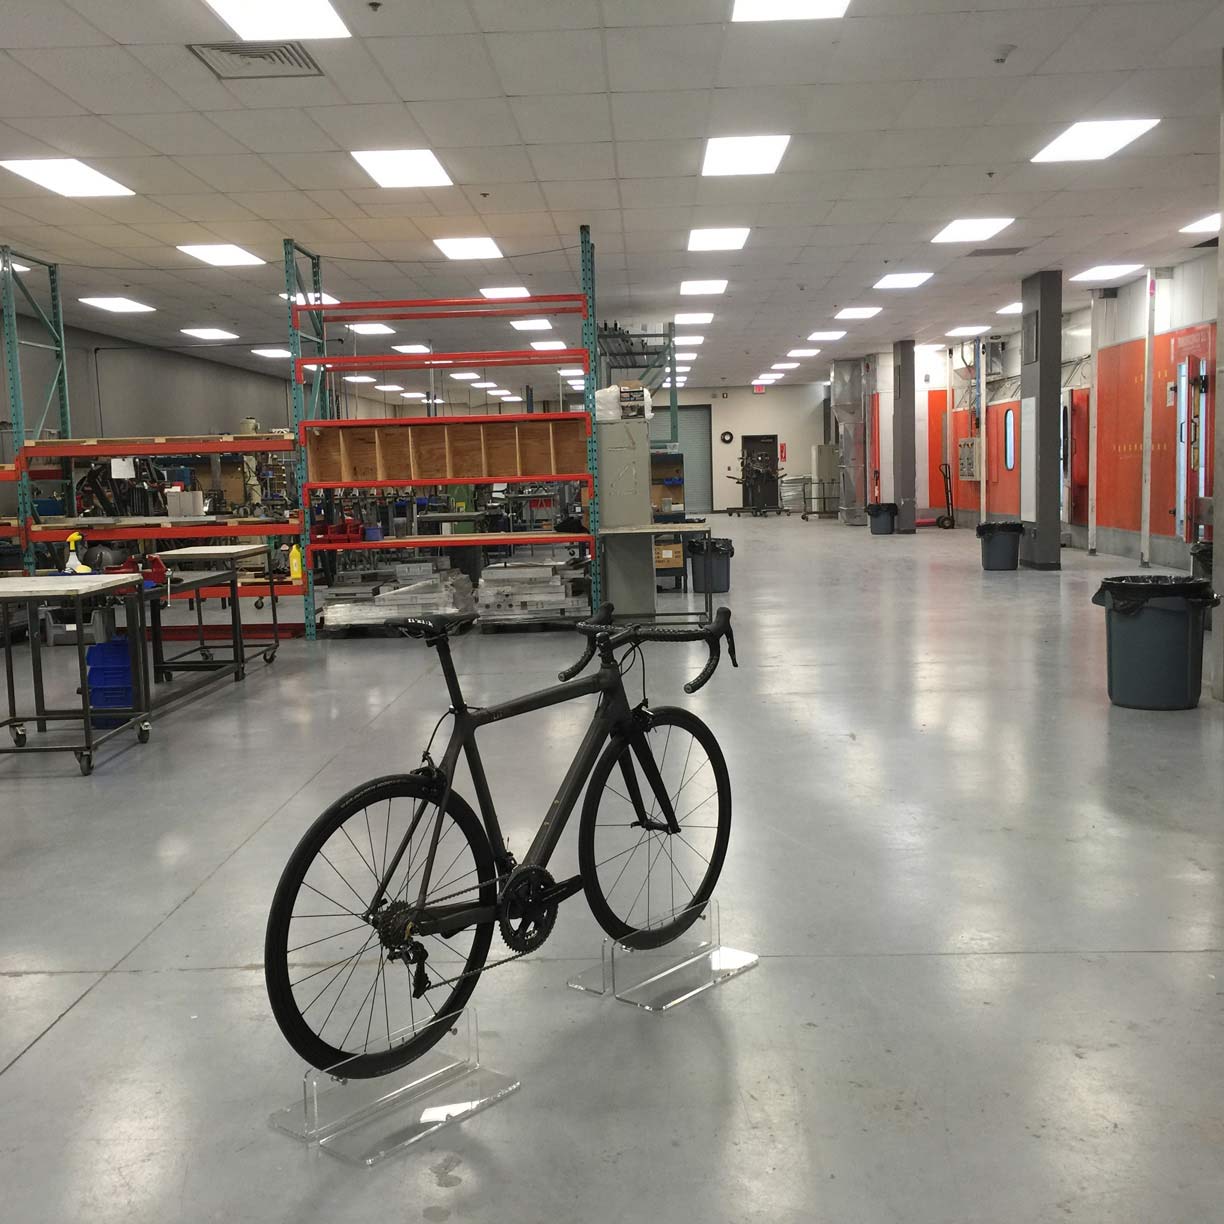 HIA Velo carbon bicycle manufacturing factory in USA